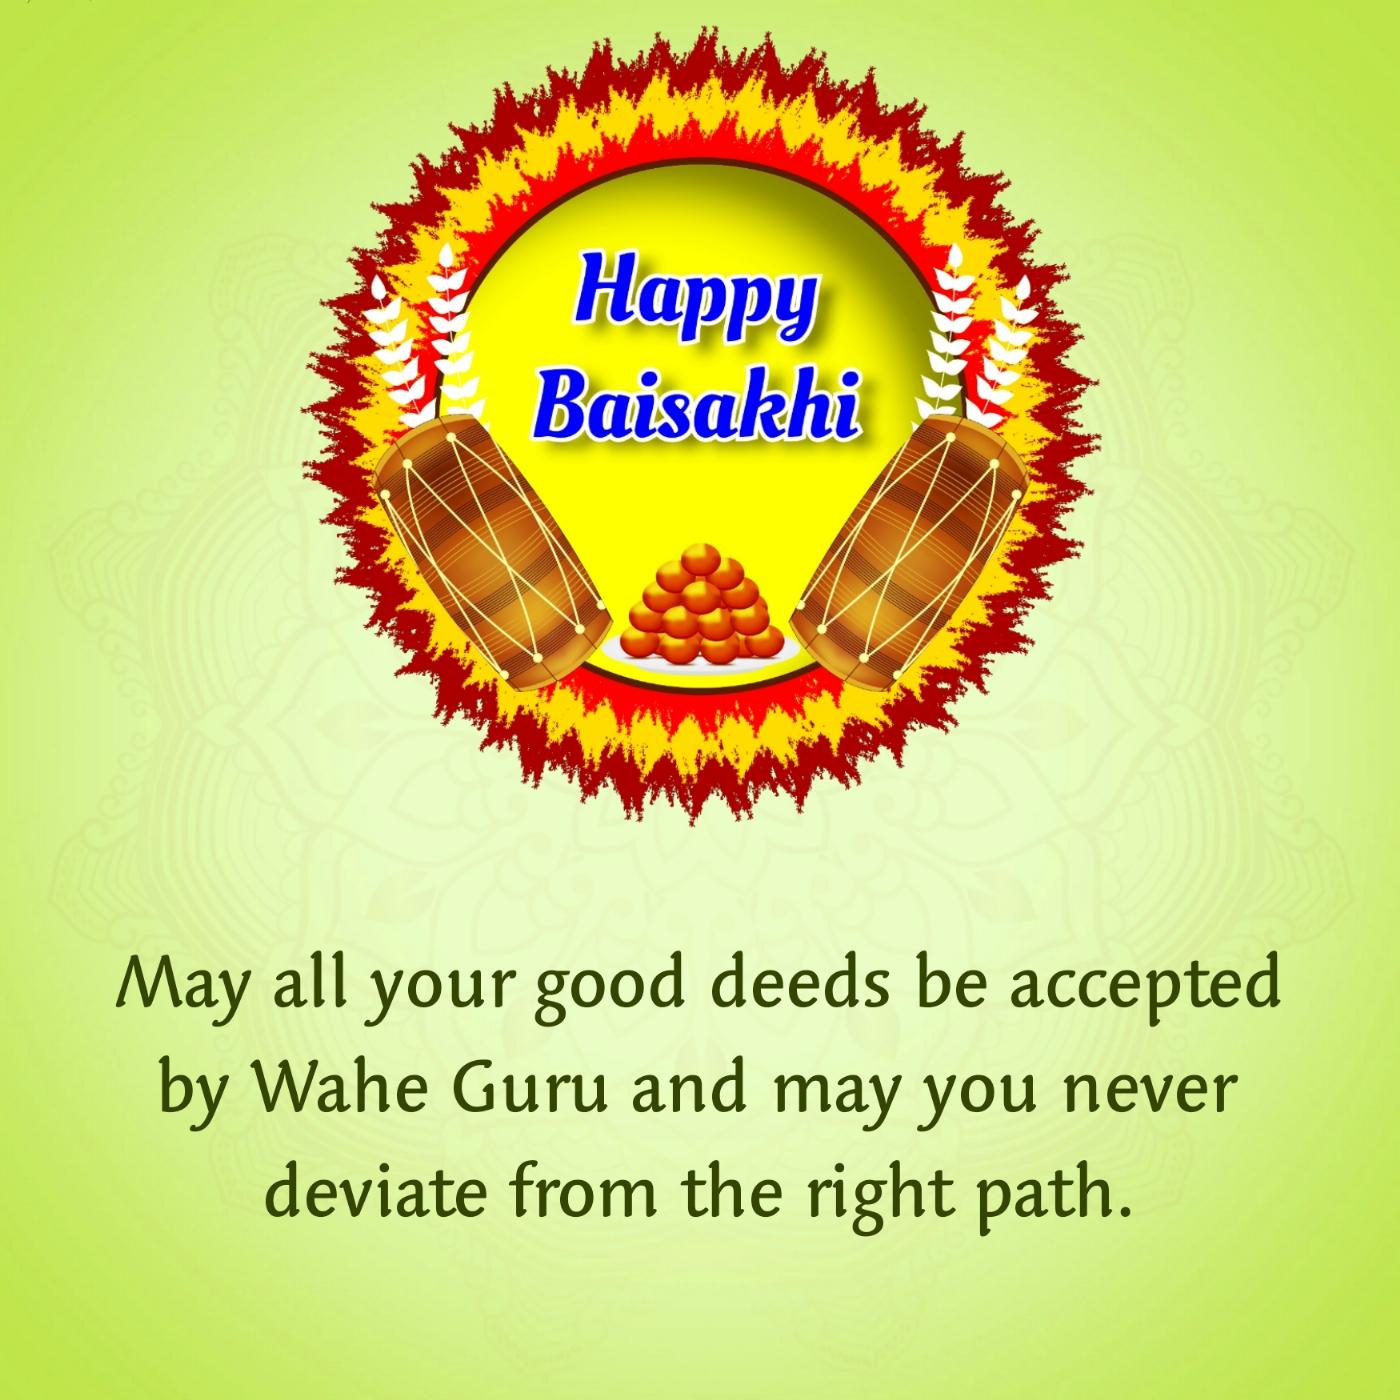 May all your good deeds be accepted by Waahe Guru